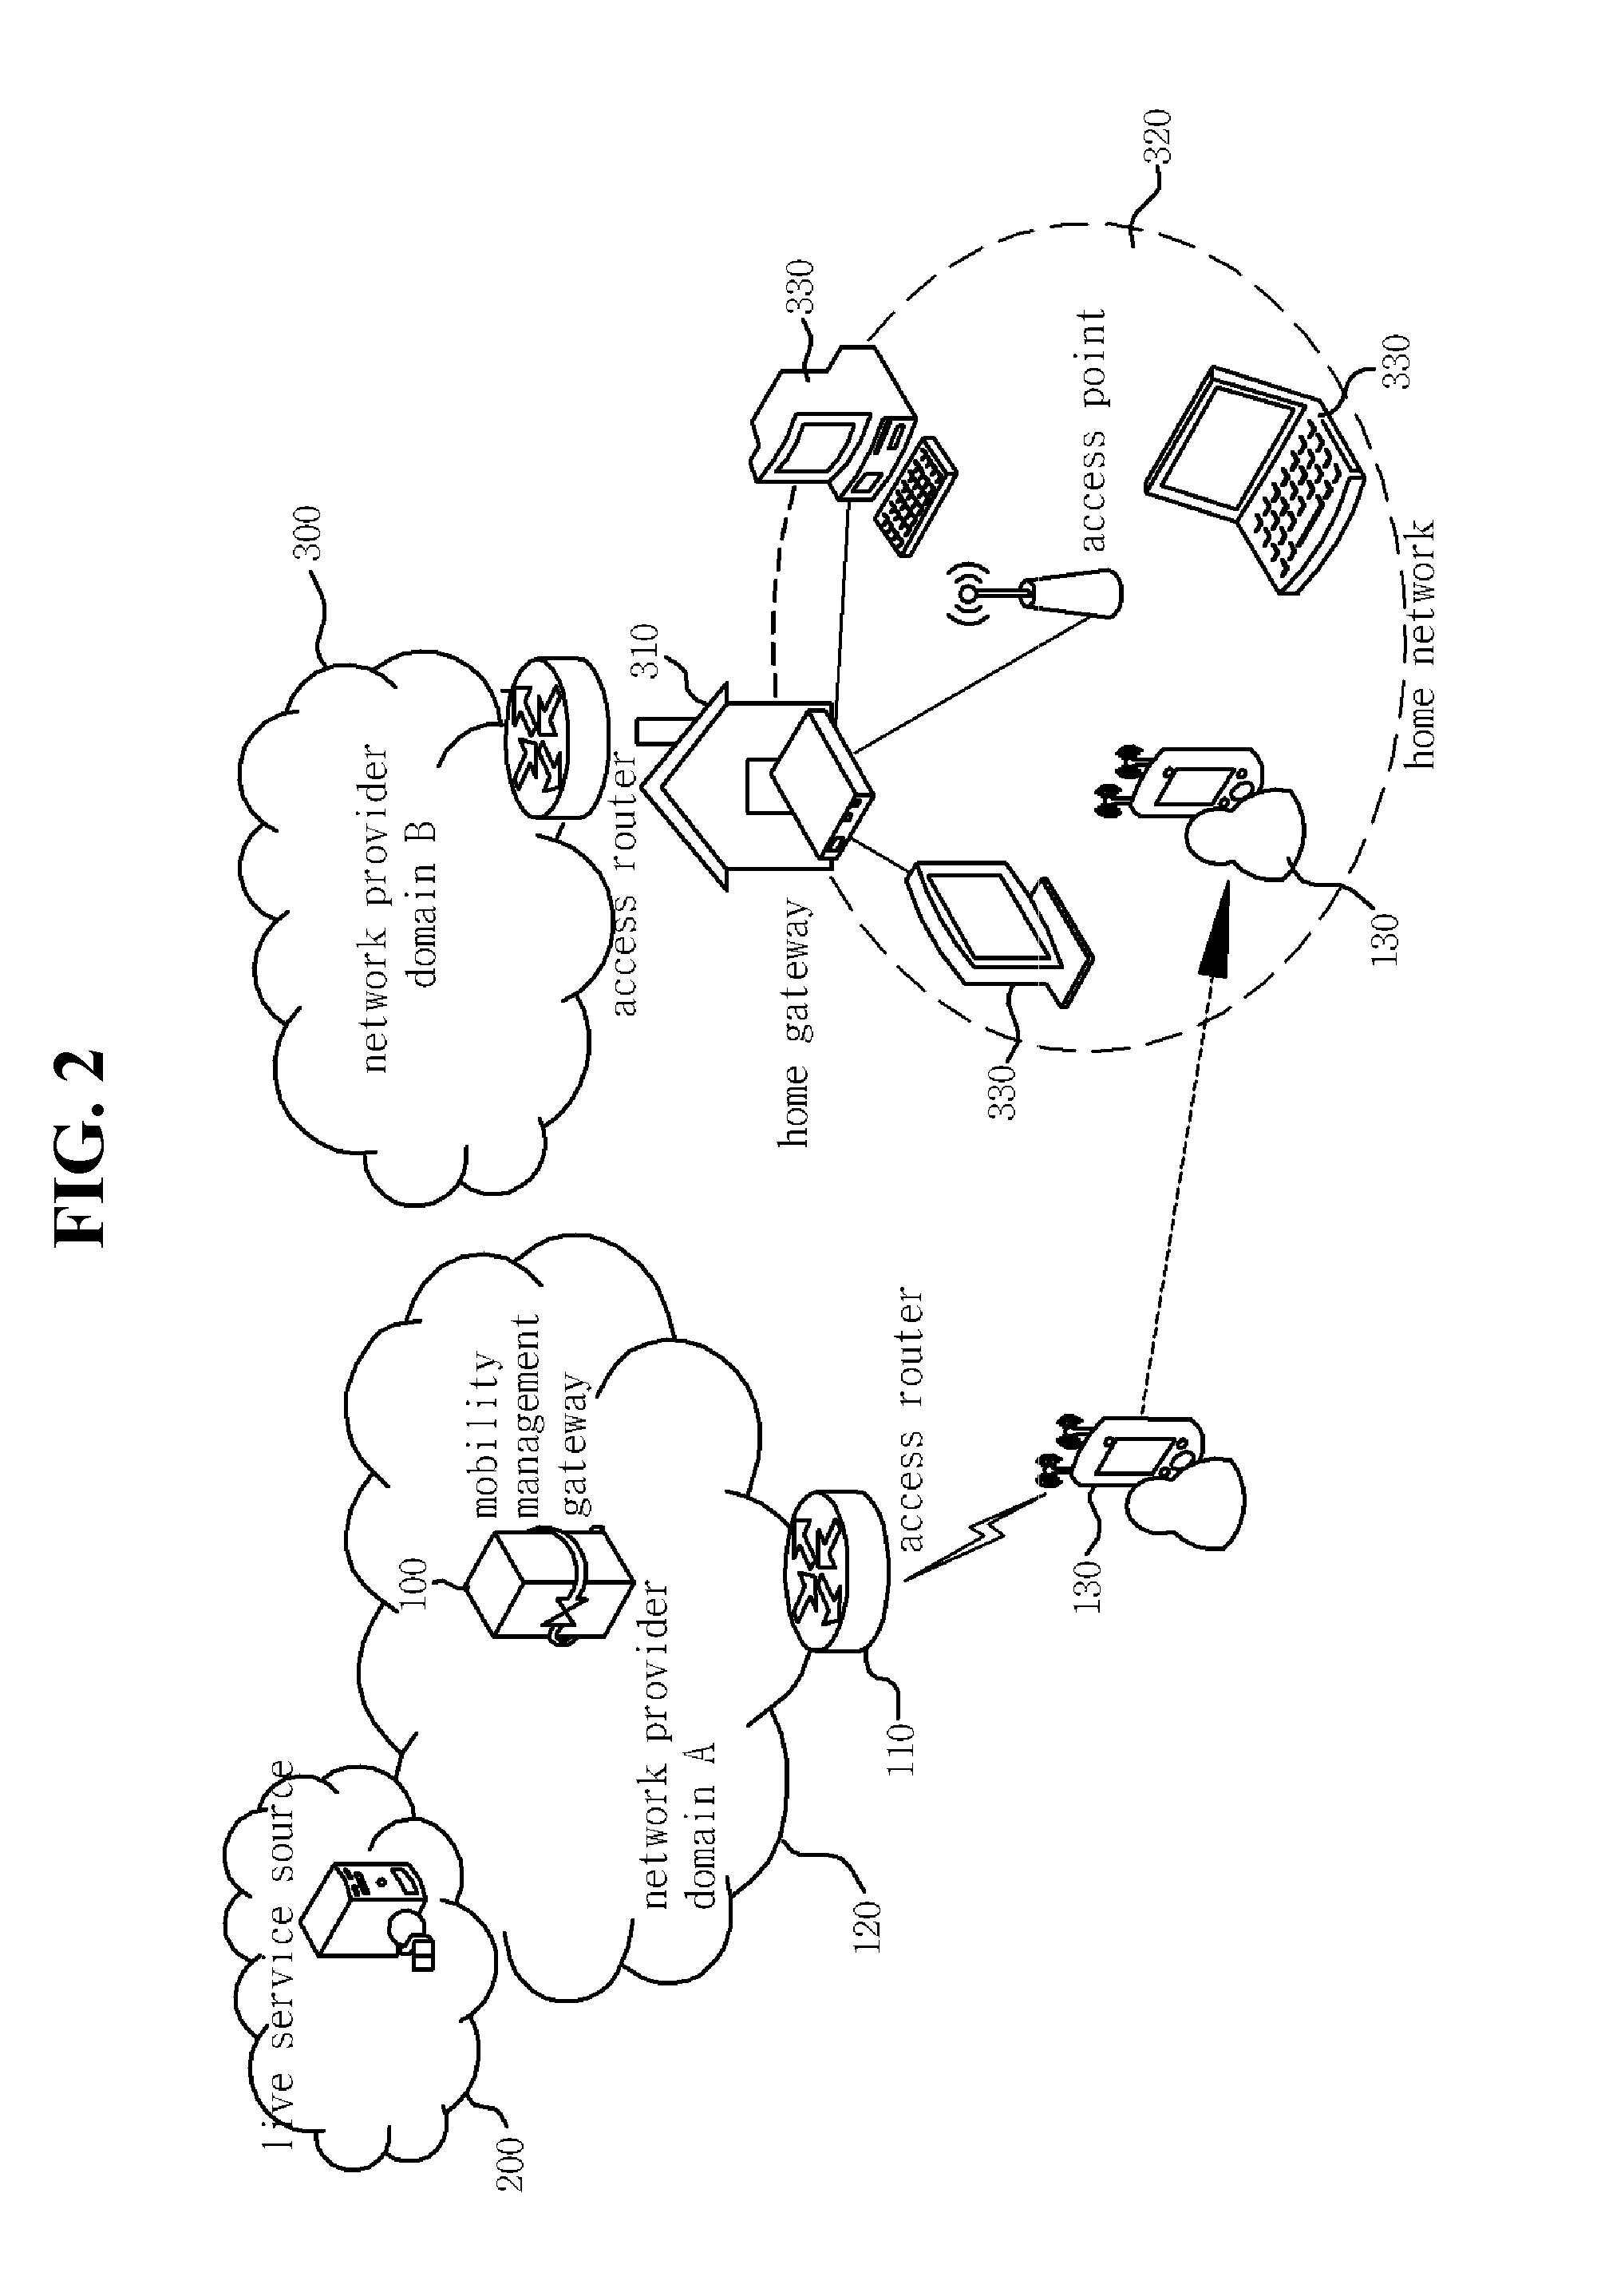 Mobile-controlled live streaming service transfer method on home network